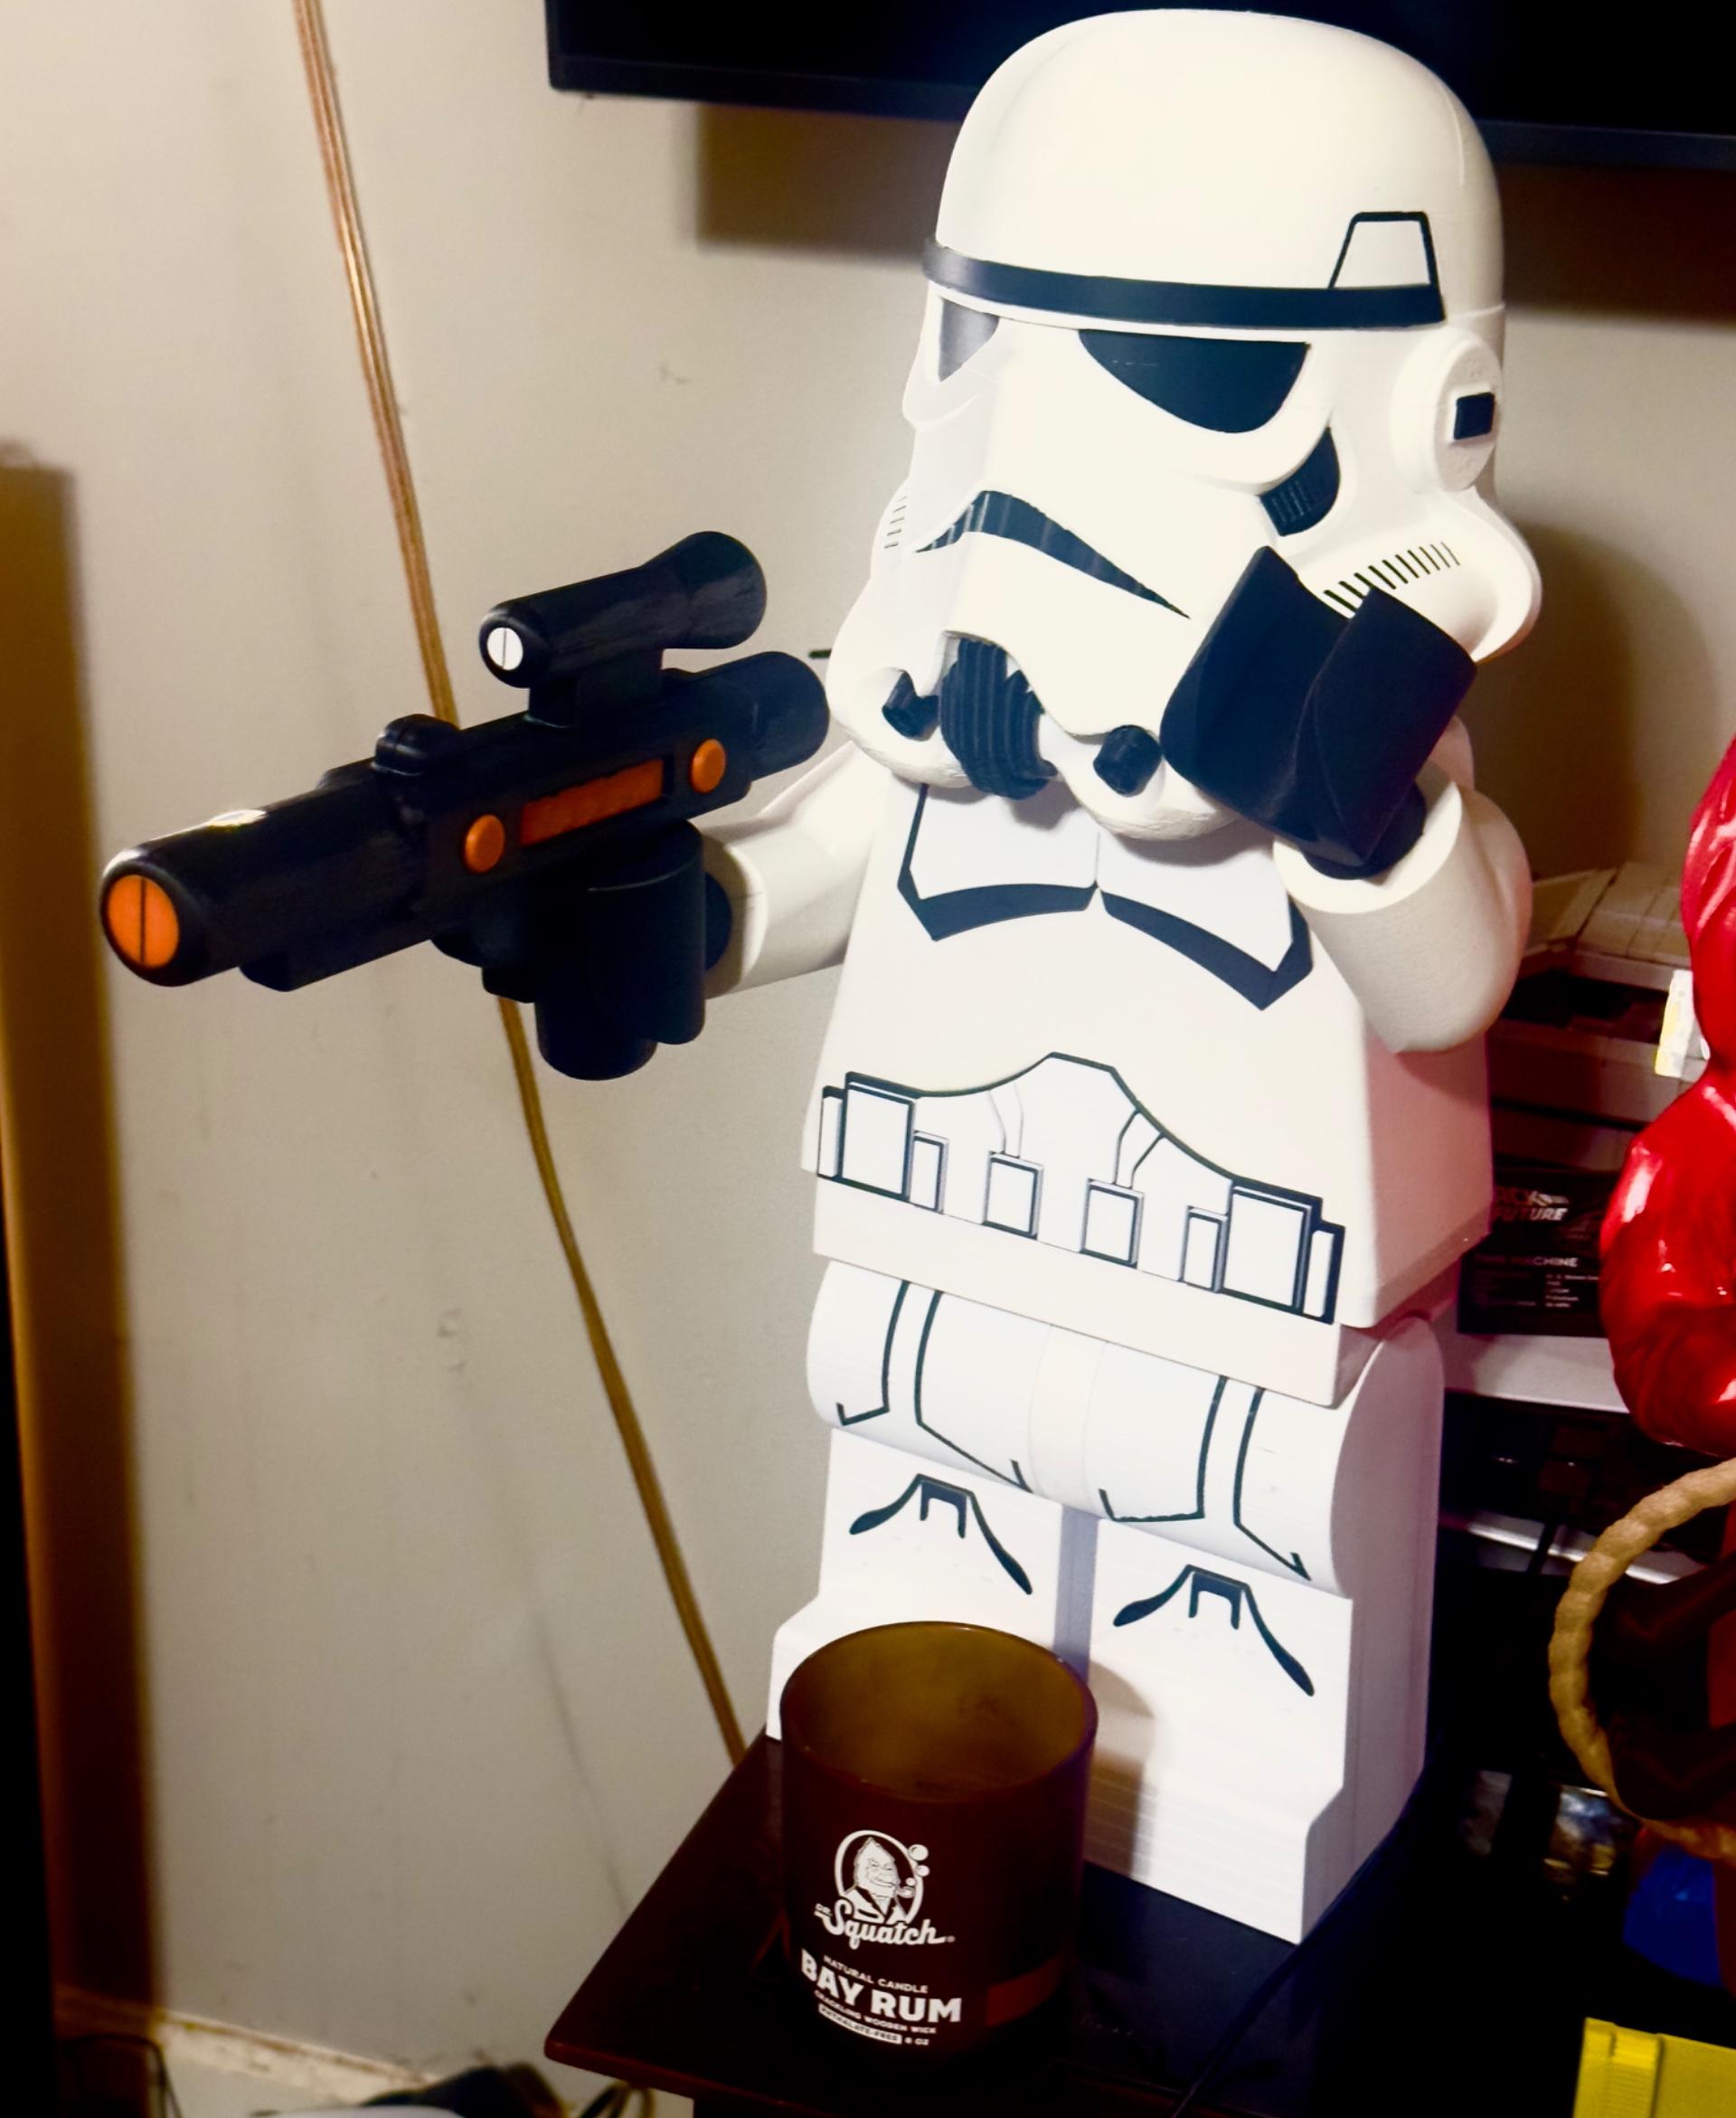 1100% Lego Stormtrooper - I made a blaster for him. Working on fixing it so it fits his hands better. I will upload a pic of the fix in a few days - 3d model